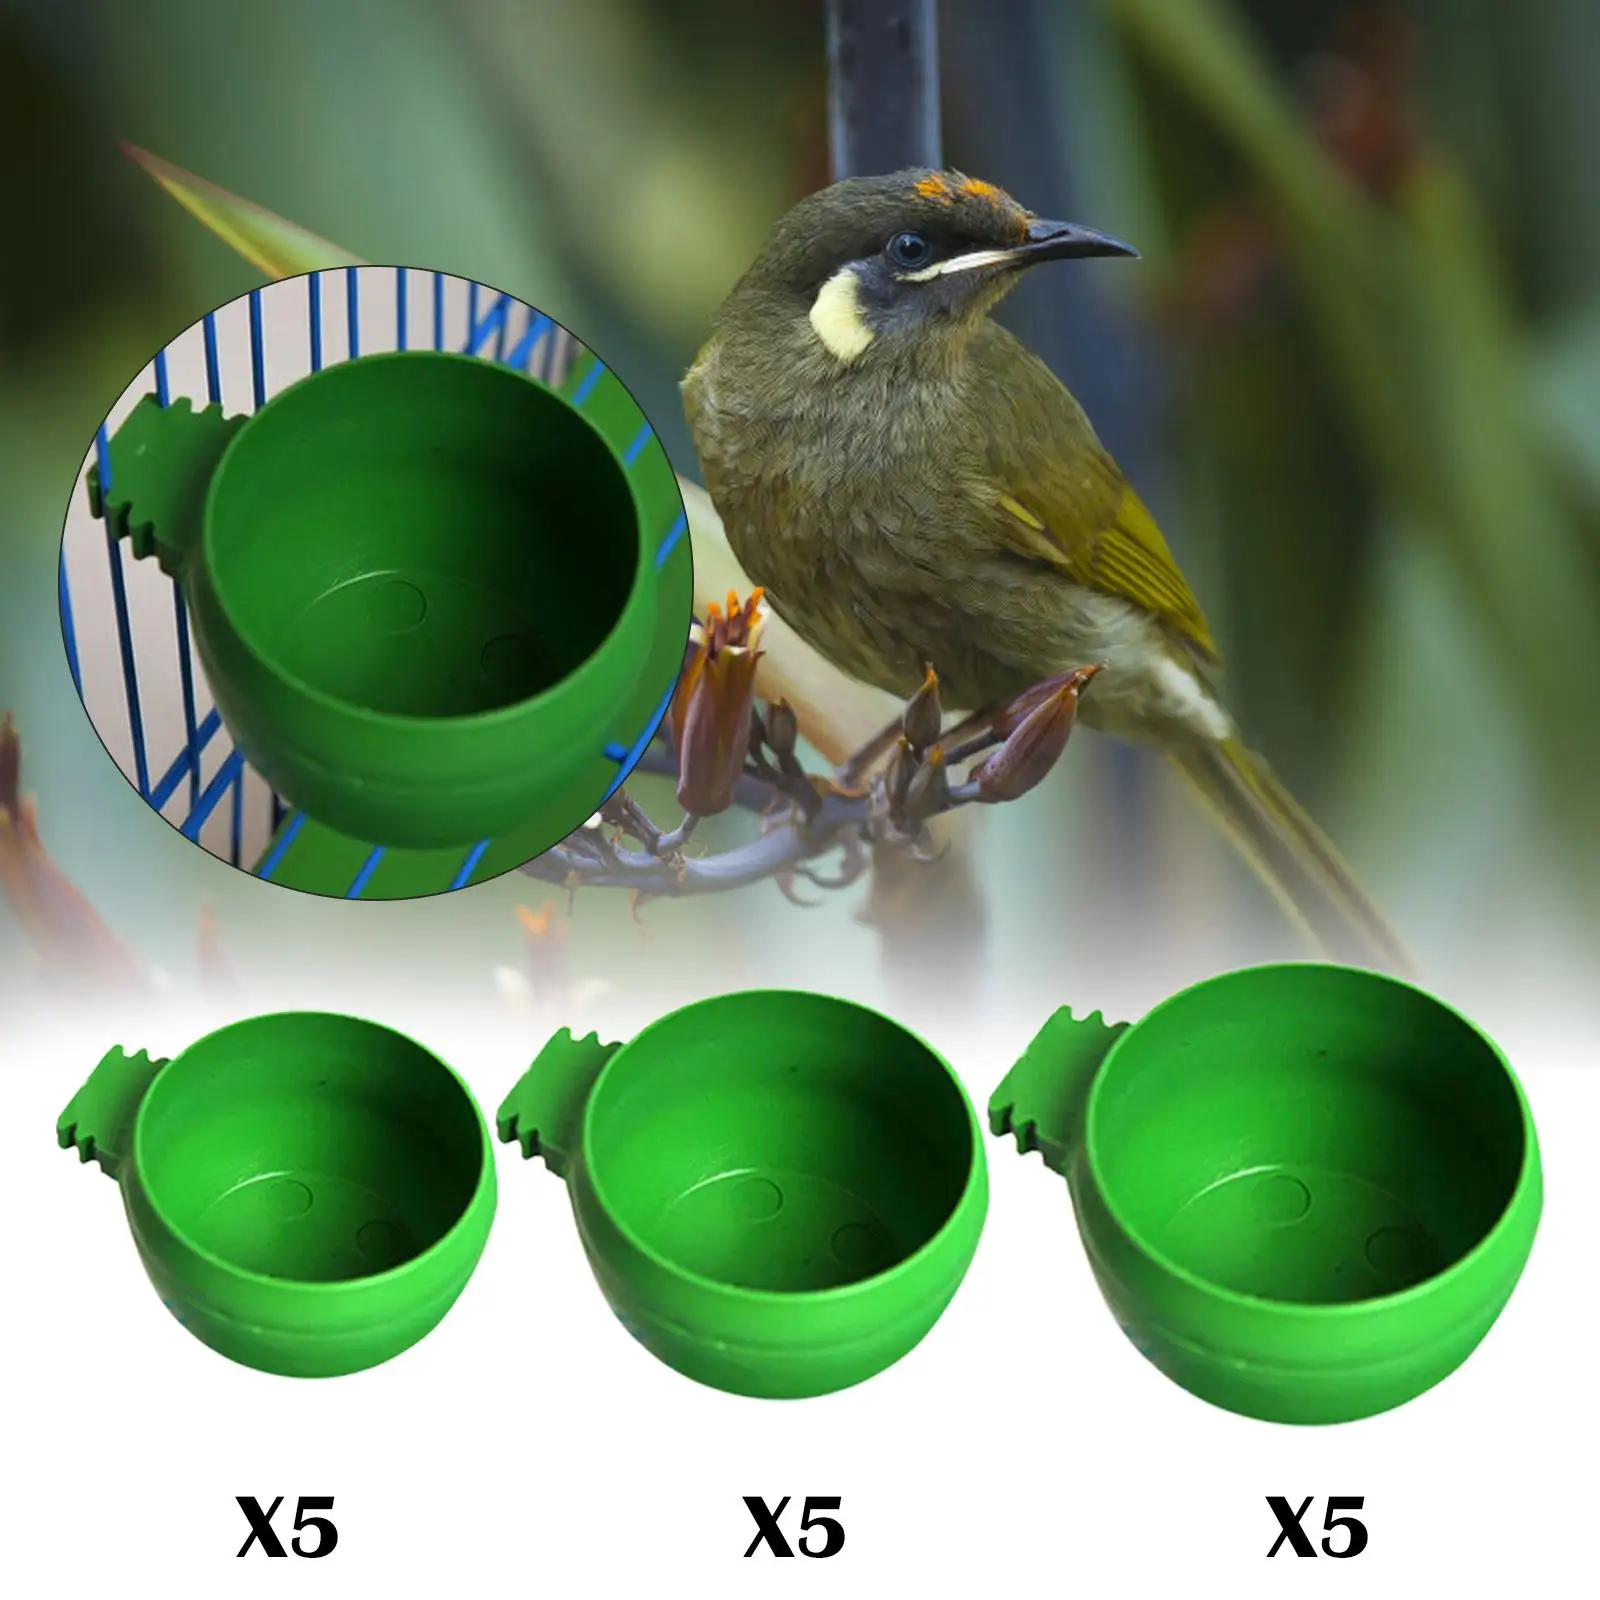 5Pcs Feeder, Cage Hanging Mini Round Feeding Dish Cups Parrot food Bowl for Birds Feeding Cockatiel Parrot Parakeet